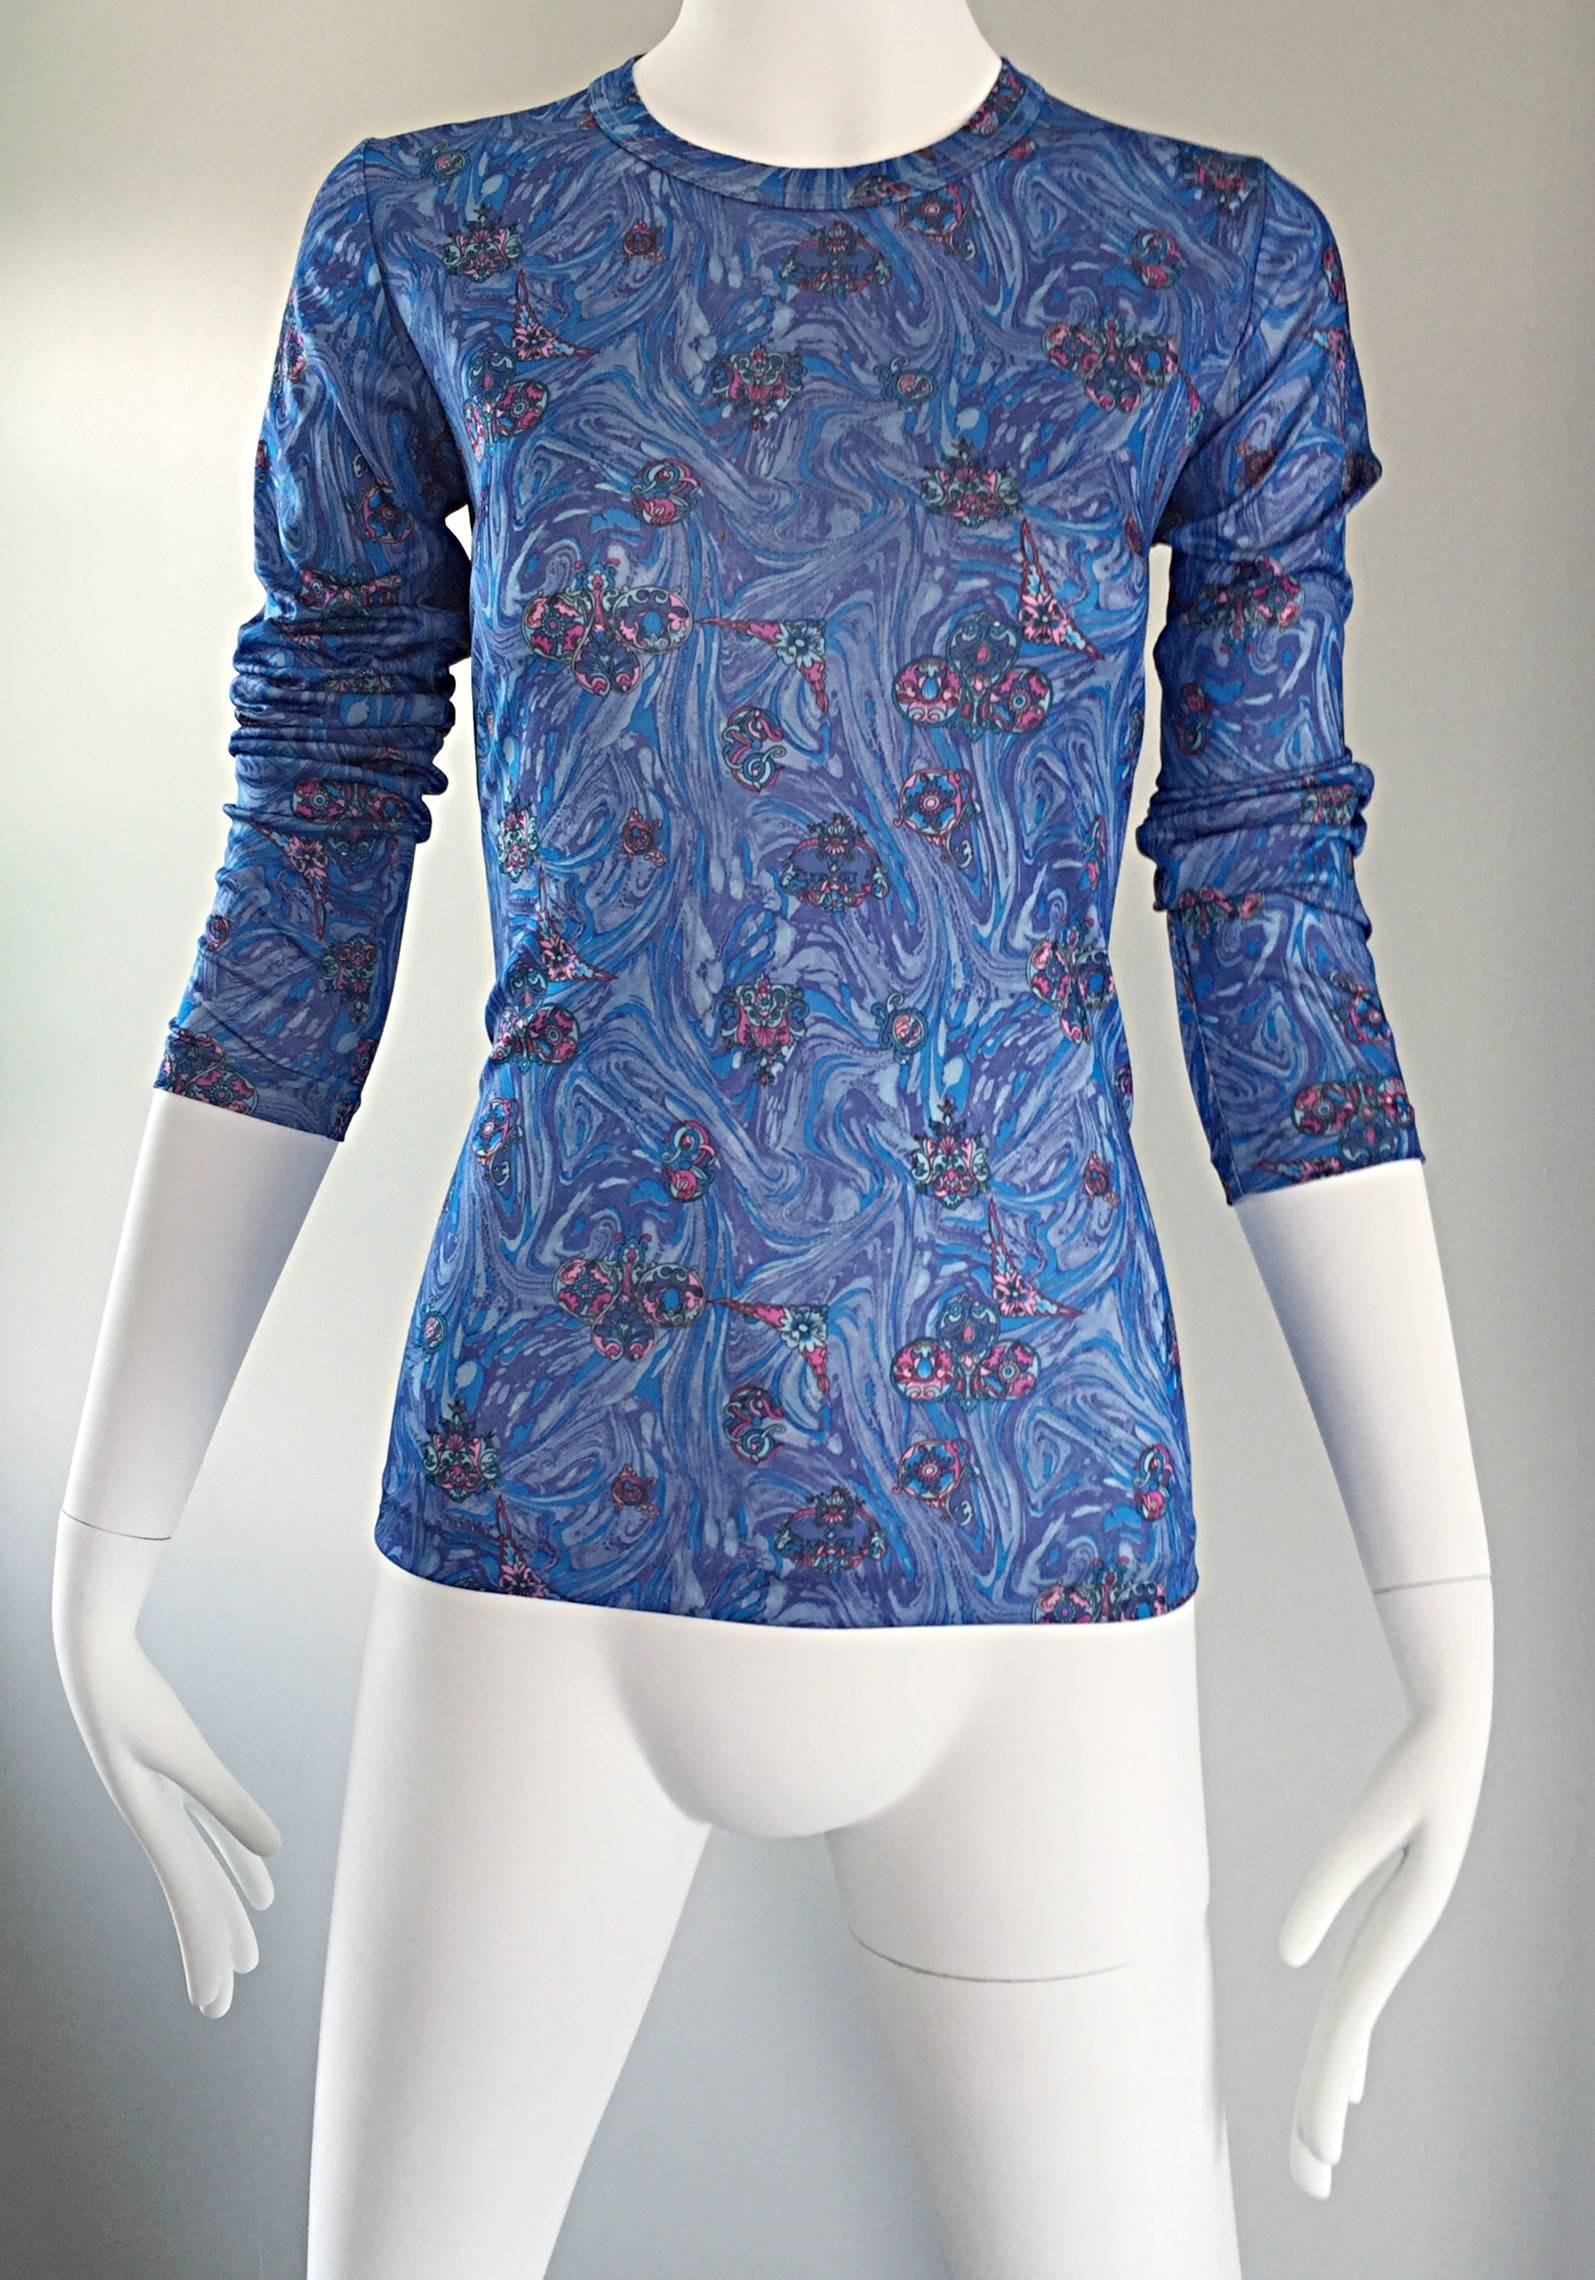 Women's 1970s Givenchy Vintage Fitted Jersey Blue Watercolor Swirls Blouse Top For Sale